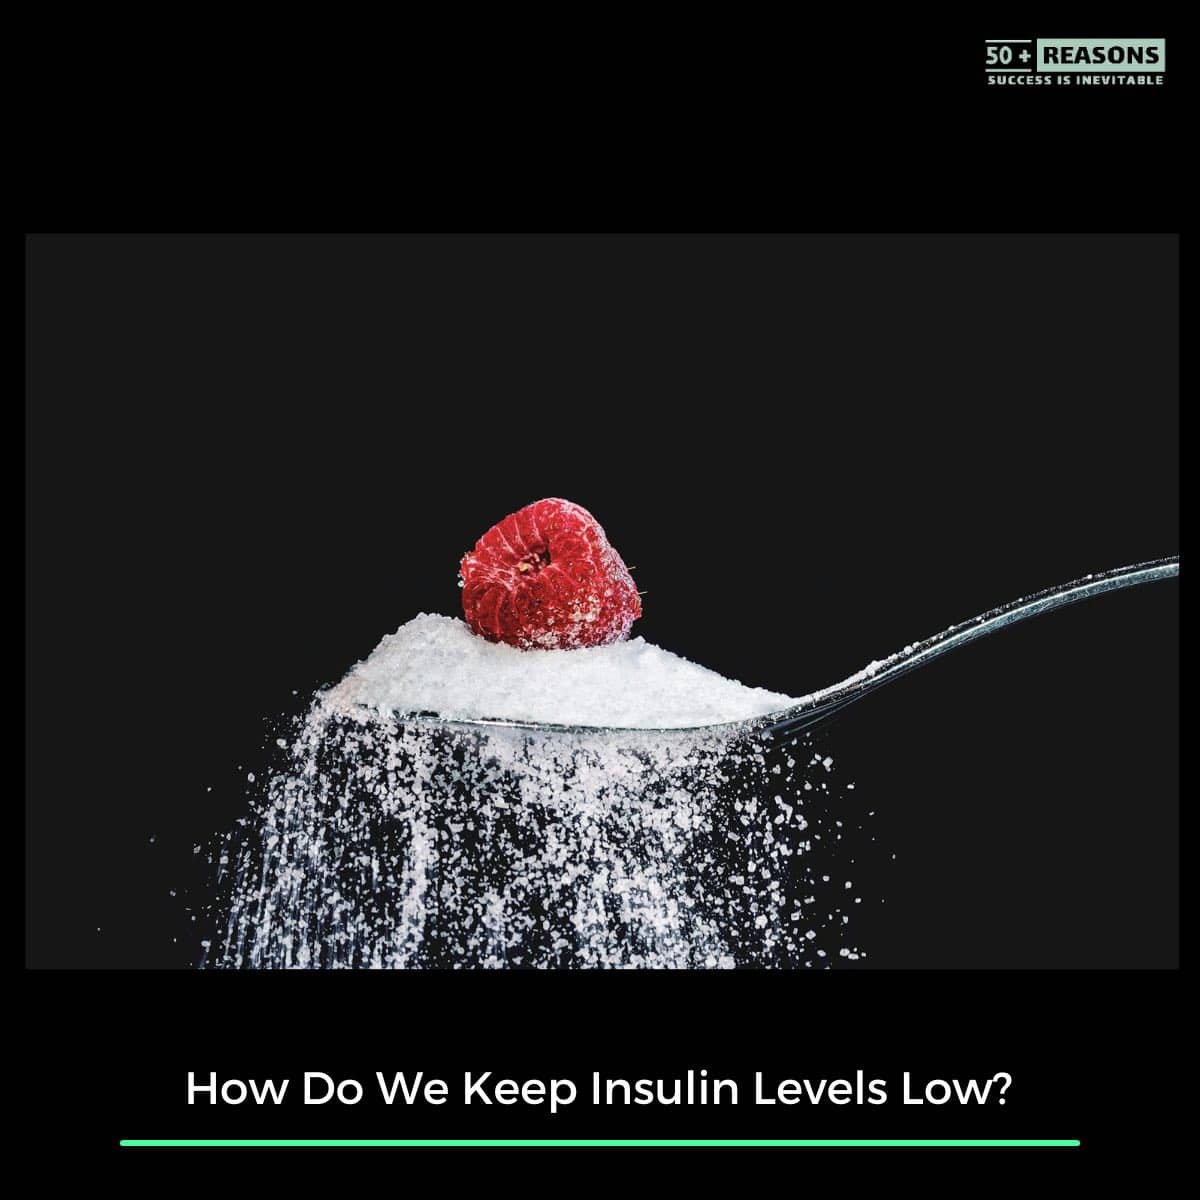 How Do We Keep Insulin Levels Low? A sugar free diet.